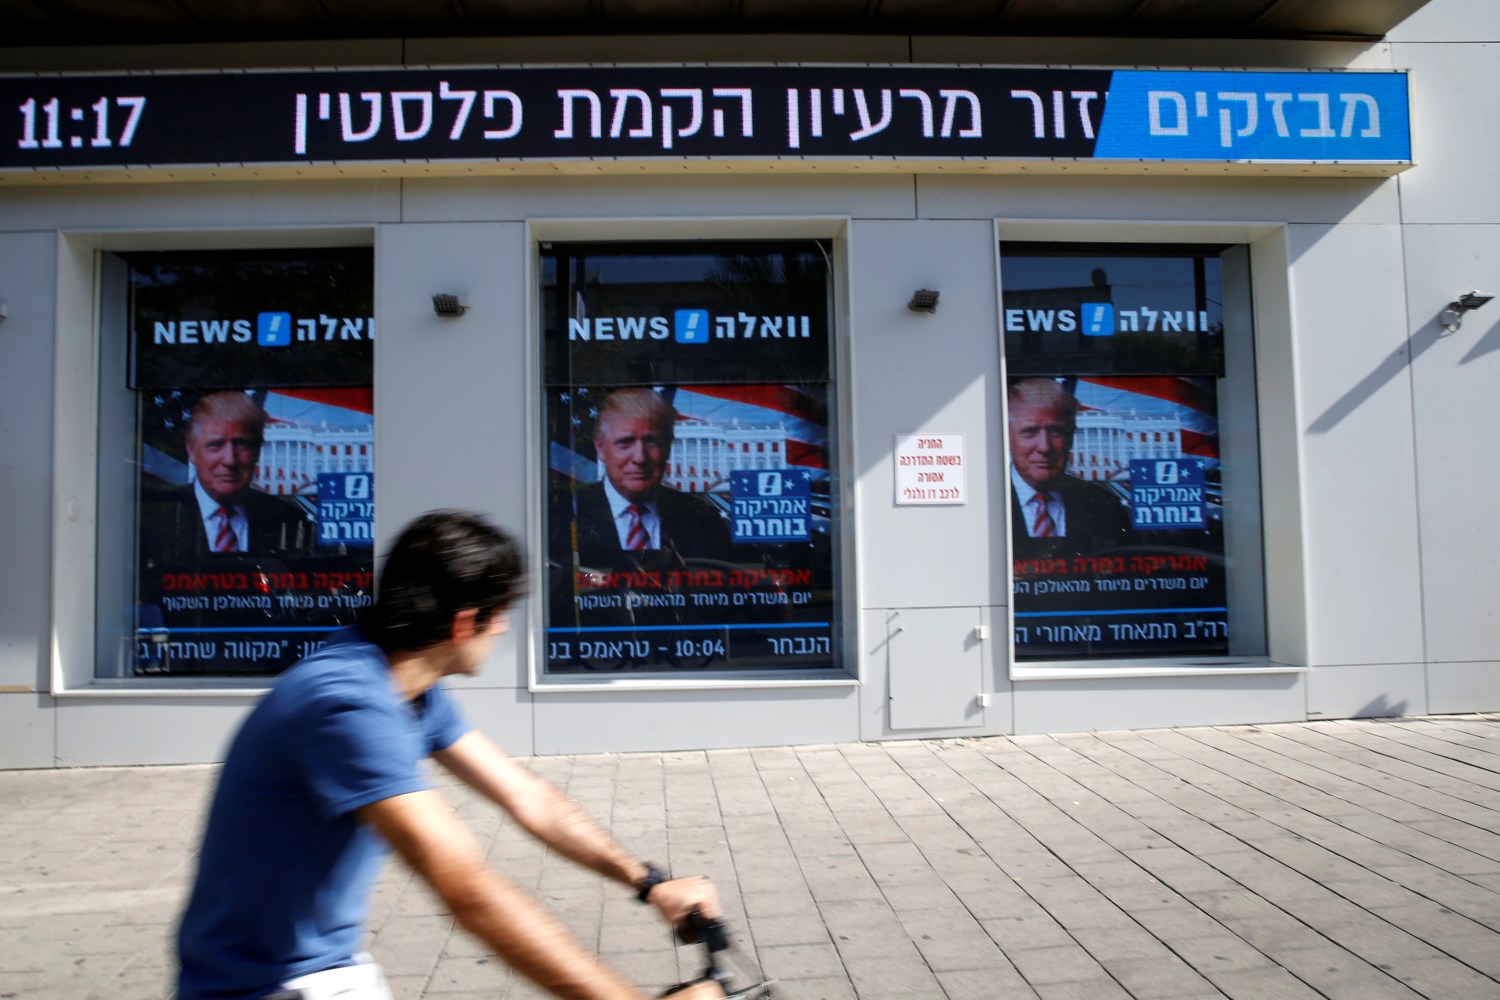 A man cycles past images of newly elected U.S. President Donald Trump which are displayed on monitors in Tel Aviv, Israel November 9, 2016. REUTERS/Baz Ratner - RTX2SSC2